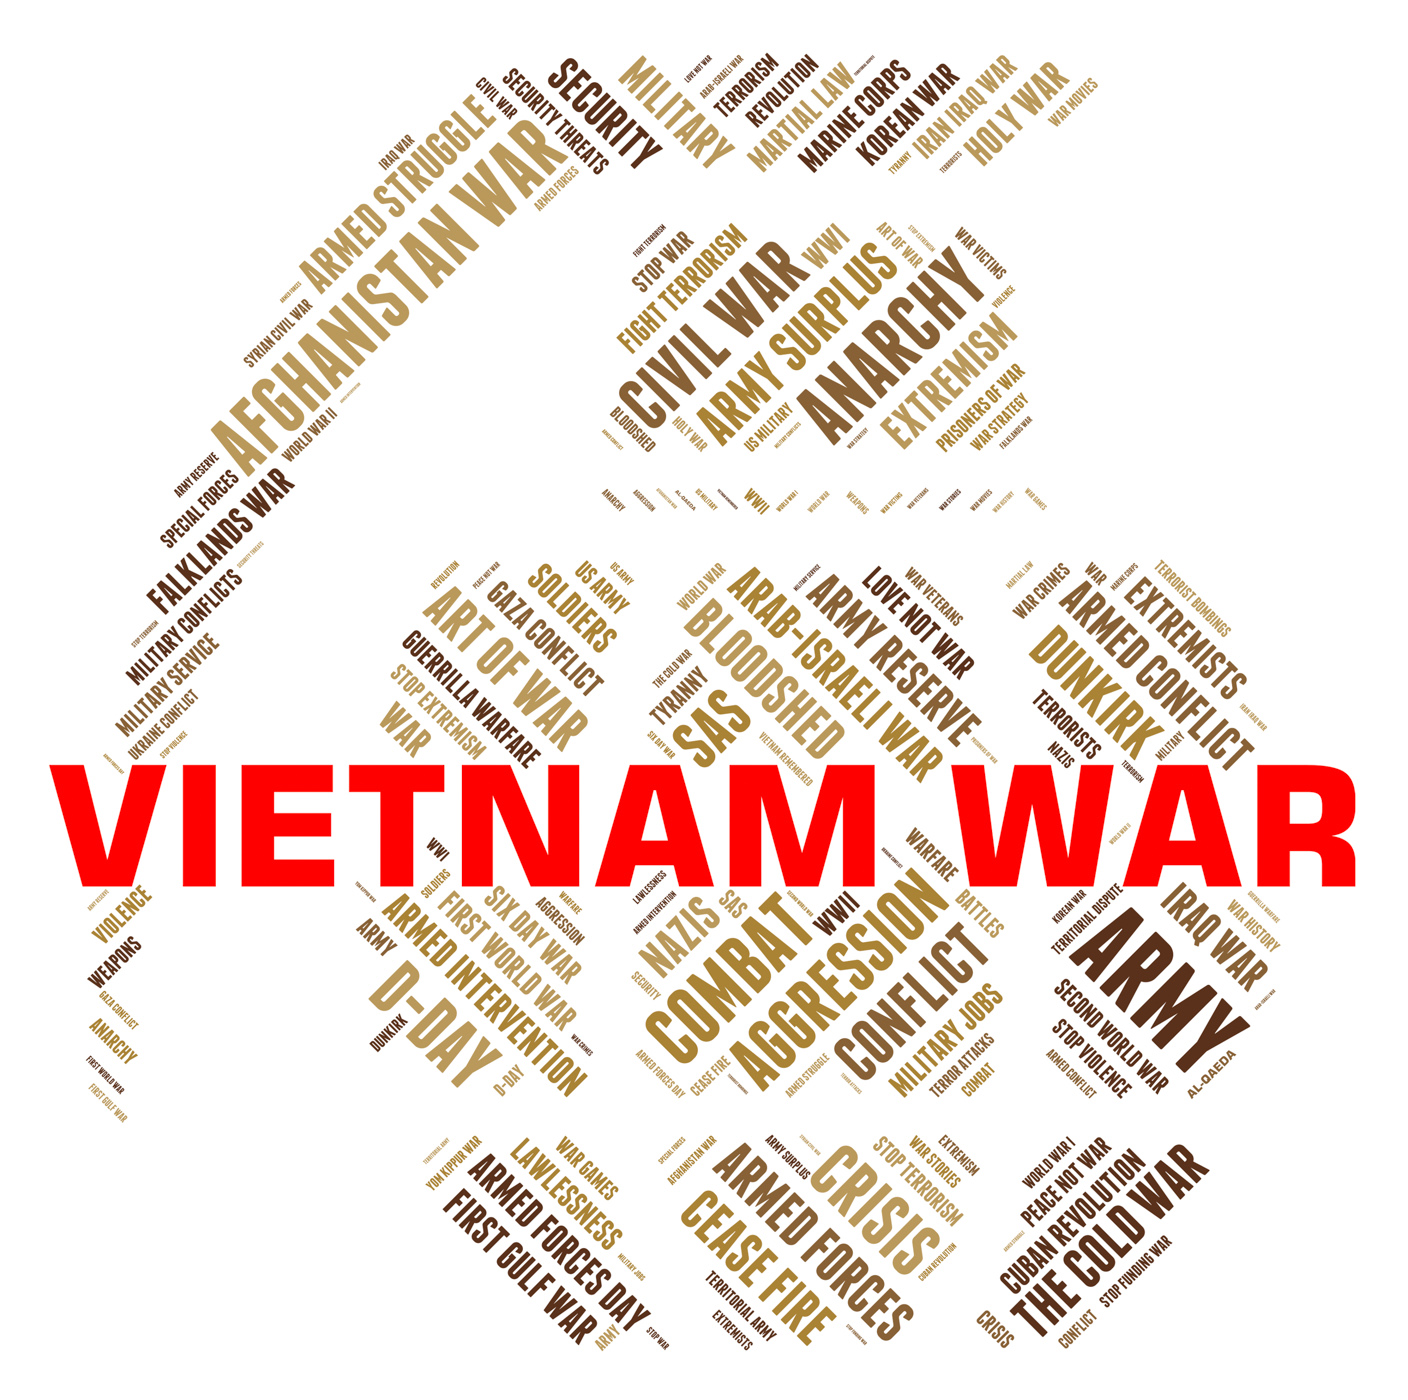 free-photo-vietnam-war-means-north-vietnamese-army-and-america